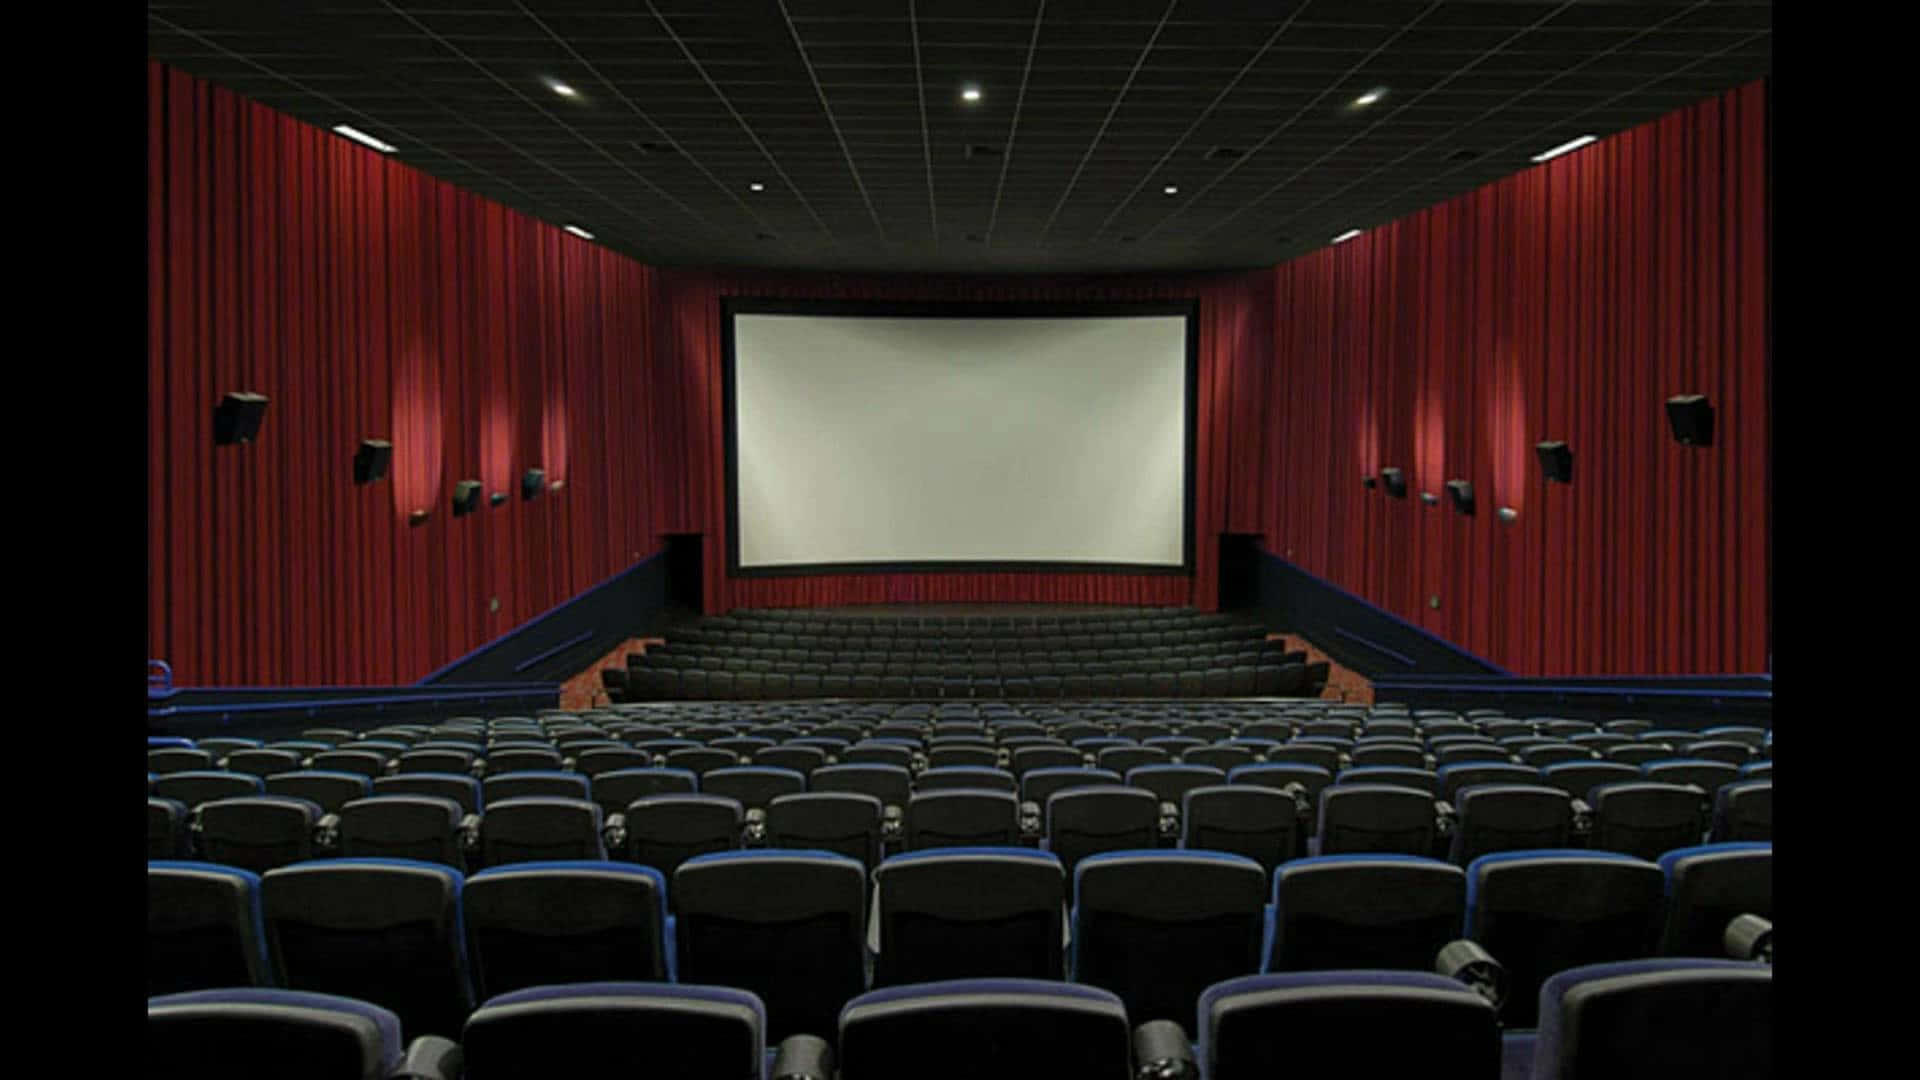 A Cinema With Rows Of Seats And A Screen Wallpaper